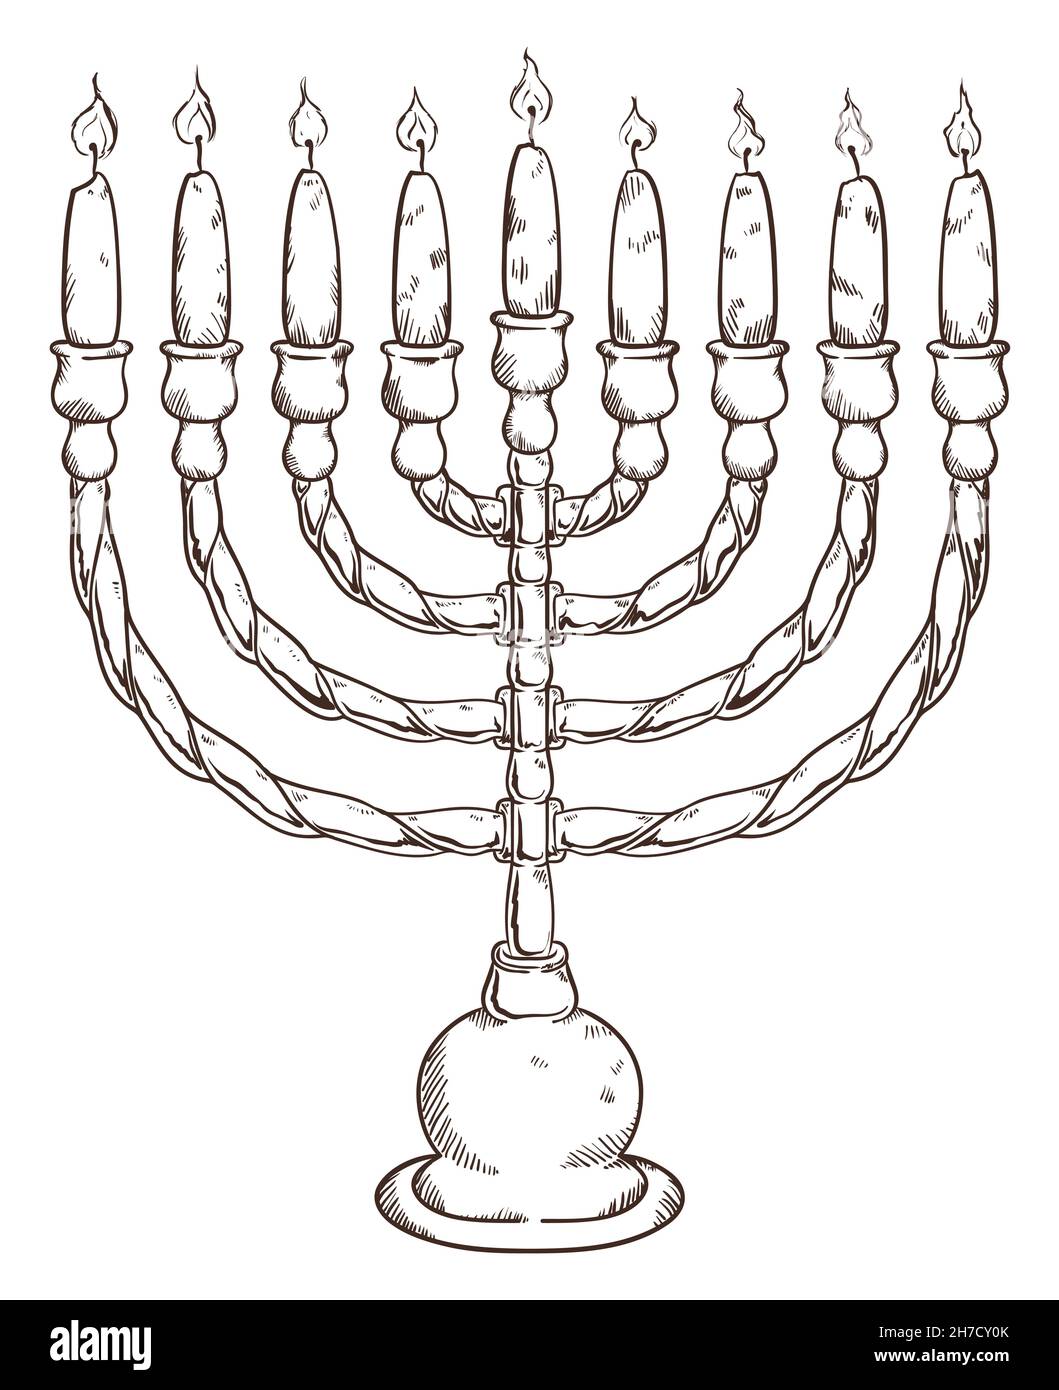 Hand drawn design of a colorless chanukiah with its nine lighted candles, ready for Hanukkah celebration Stock Vector